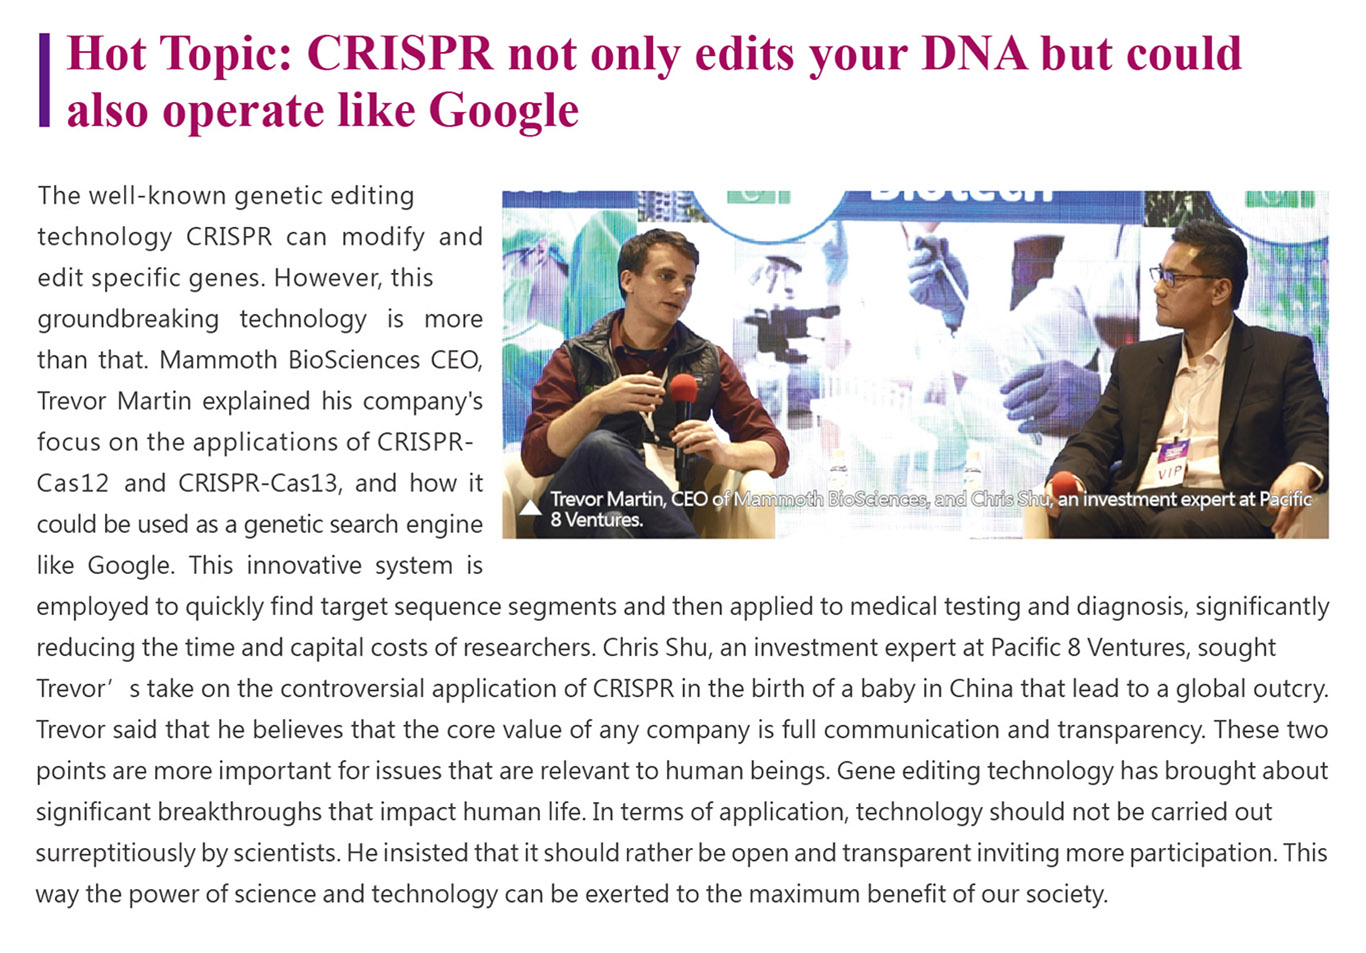 The well-known genetic editing technology CRISPR can modify and edit specific genes. However, this groundbreaking technology is more than that. Mammoth BioSciences CEO, Trevor Martin explained his company’s focus on the applications of CRISPR-Cas12 and CRISPR-Cas13, and how it could be used as a genetic search engine like Google. This innovative system is employed to quickly find target sequence segments and then applied to medical testing and diagnosis, significantly reducing the time and capital costs of researchers. Chris Shu, an investment expert at Pacific 8 Ventures, sought Trevor’s take on the controversial application of CRISPR in the birth of a baby in China that lead to a global outcry. Trevor said that he believes that the core value of any company is full communication and transparency. These two points are more important for issues that are relevant to human beings. Gene editing technology has brought about significant breakthroughs that impact human life. In terms of application, technology should not be carried out surreptitiously by scientists. He insisted that it should rather be open and transparent inviting more participation. This way the power of science and technology can be exerted to the maximum benefit of our society